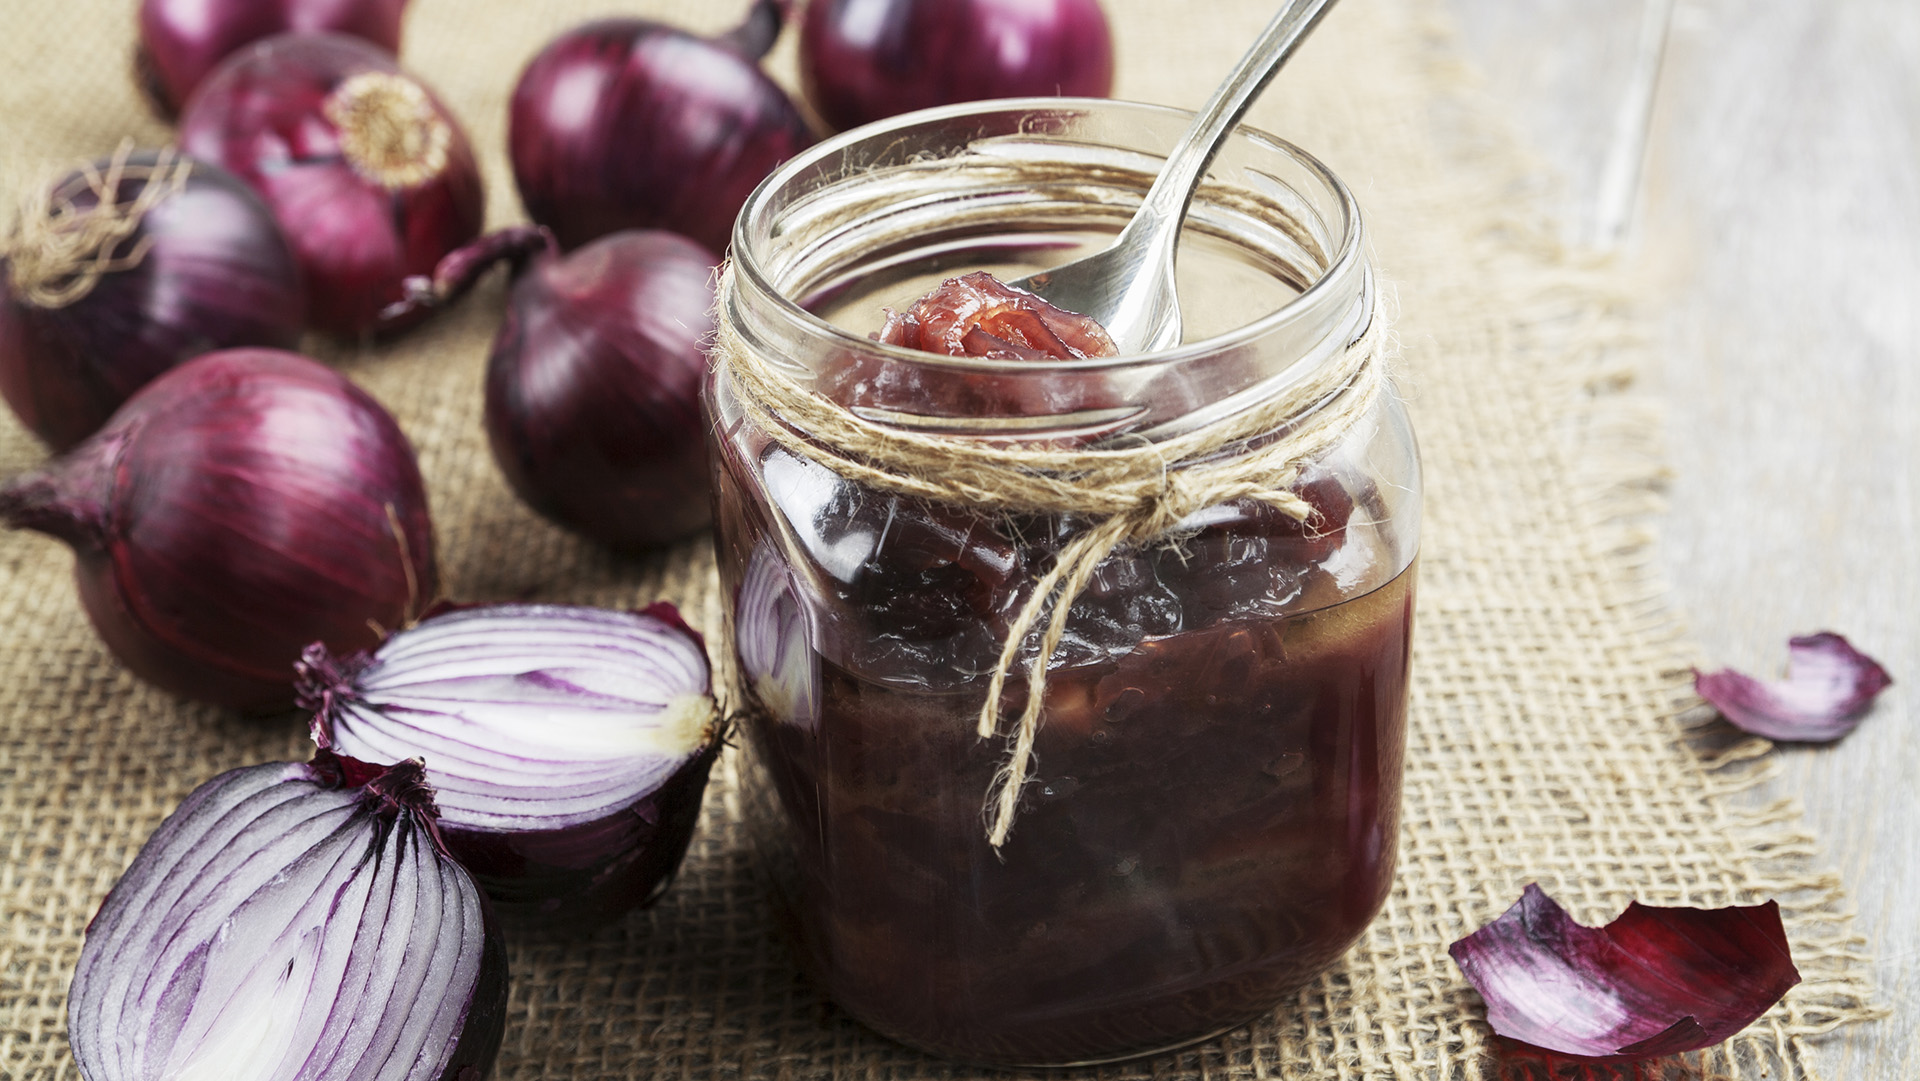 Onion jam in a glass jar on a wooden table